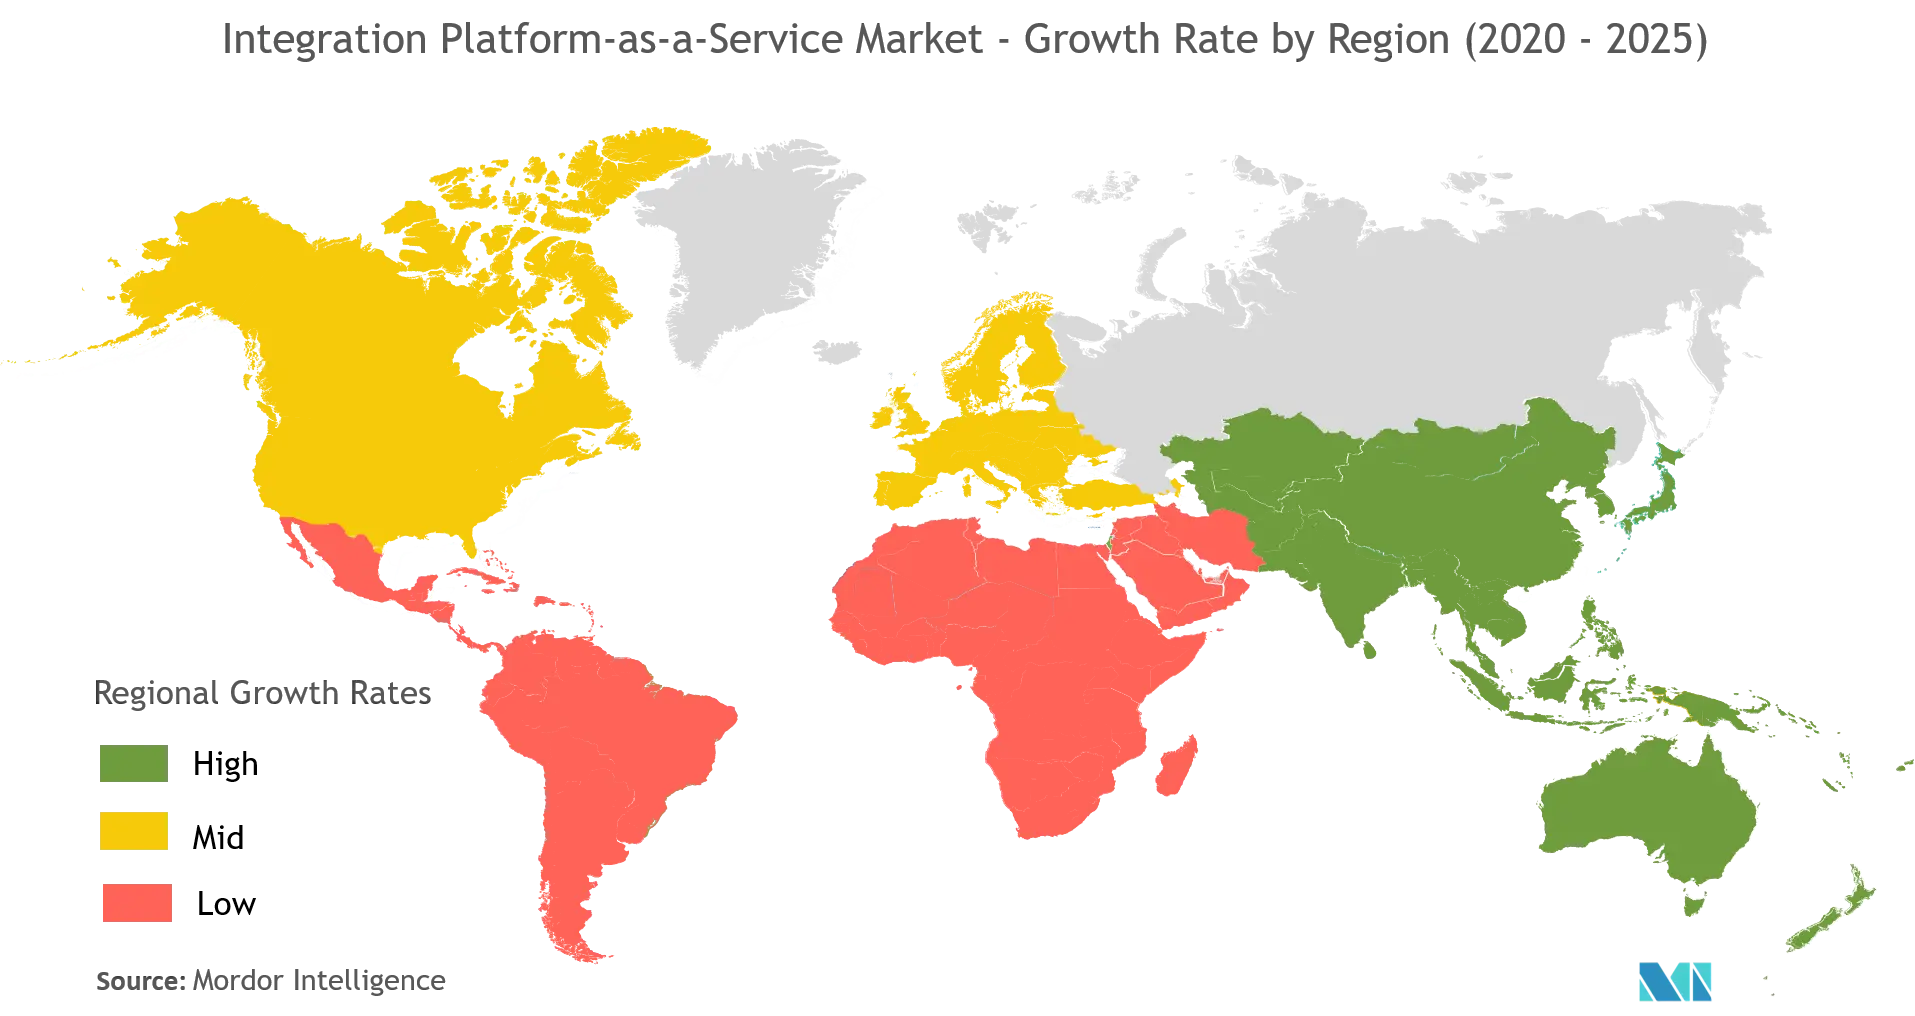 Integration Platform as a Service Market - Growth Rate by Region (2020 - 2025)